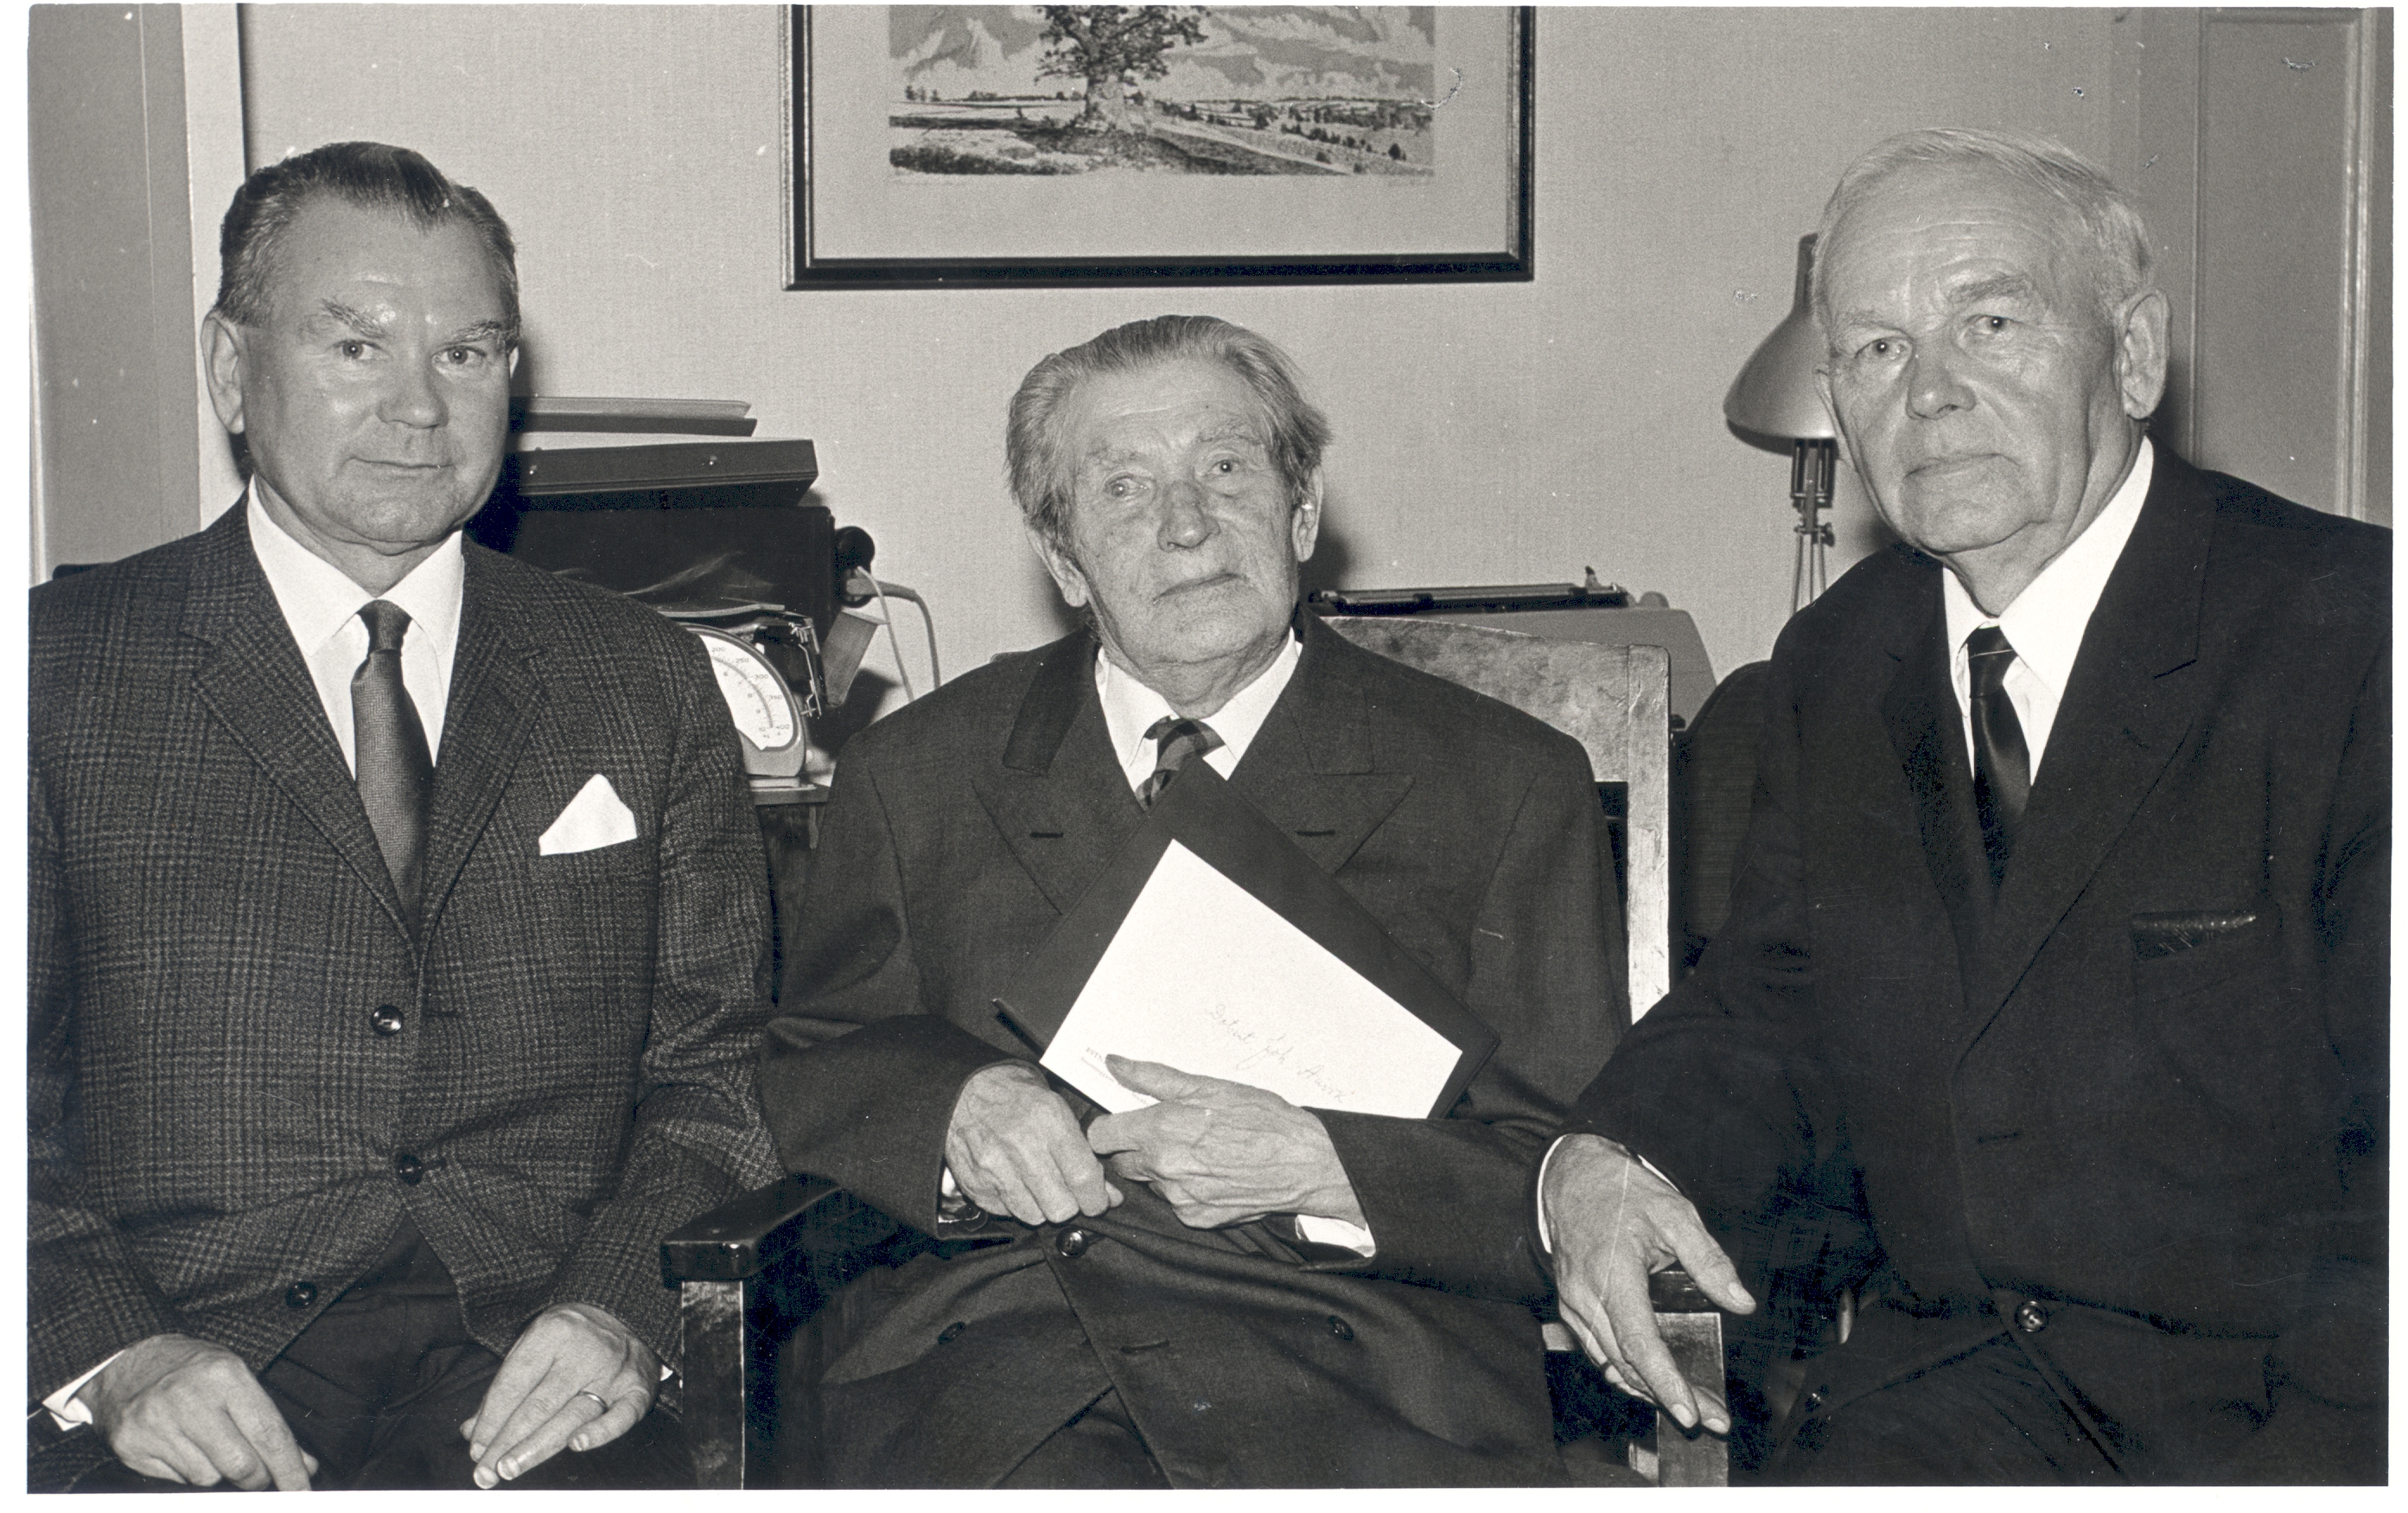 H. Mark, J. Aavik and a. Reintam. The award of the Estonian Cultural Foundation Prize to J. Aaviku in February 1969